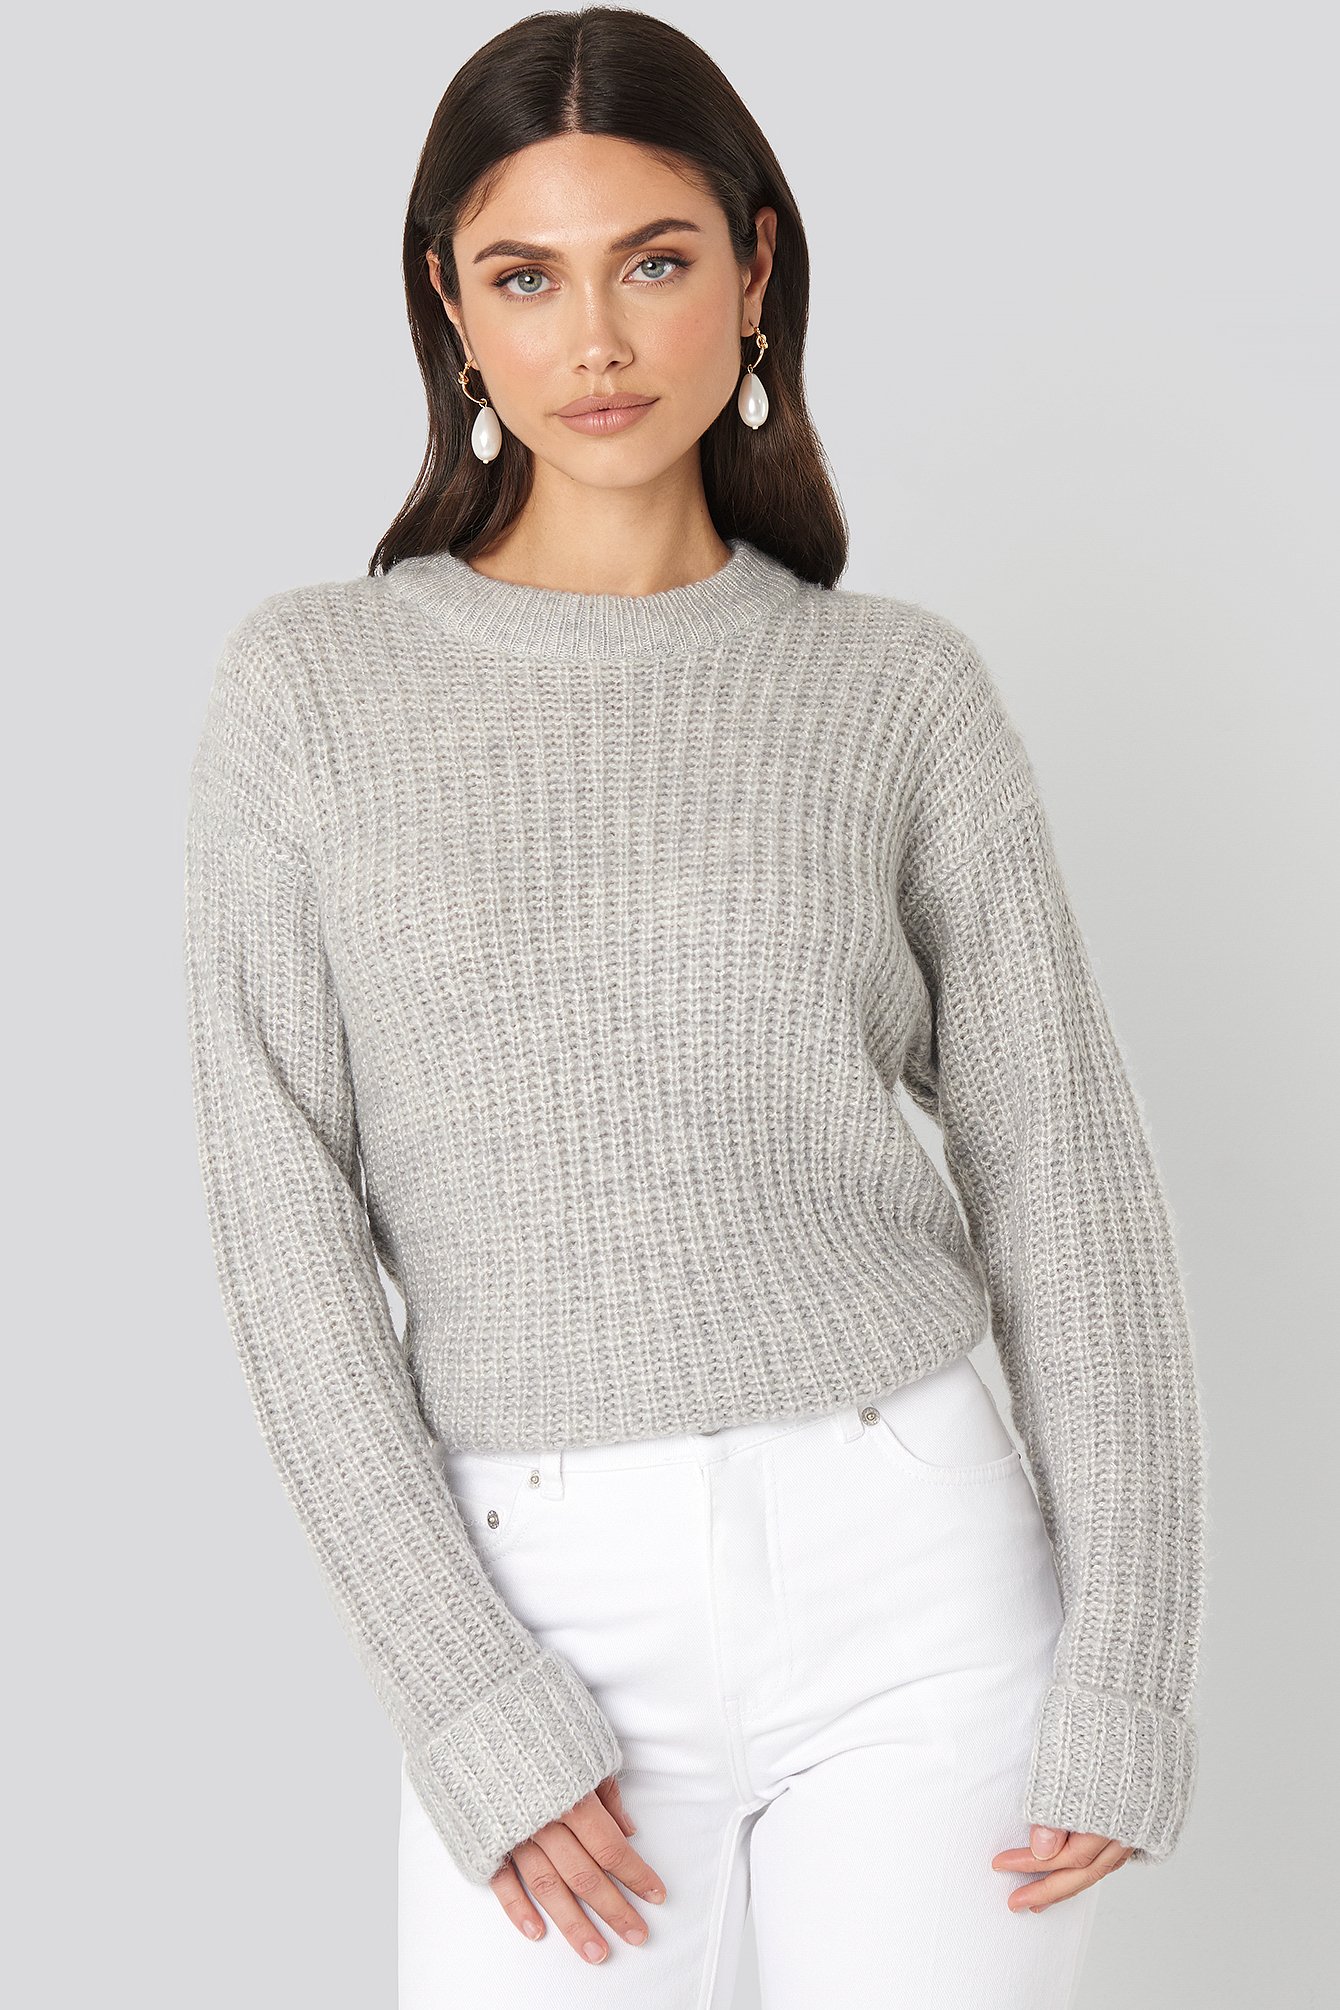 Folded Sleeve Round Neck Knitted Sweater Grey | na-kd.com